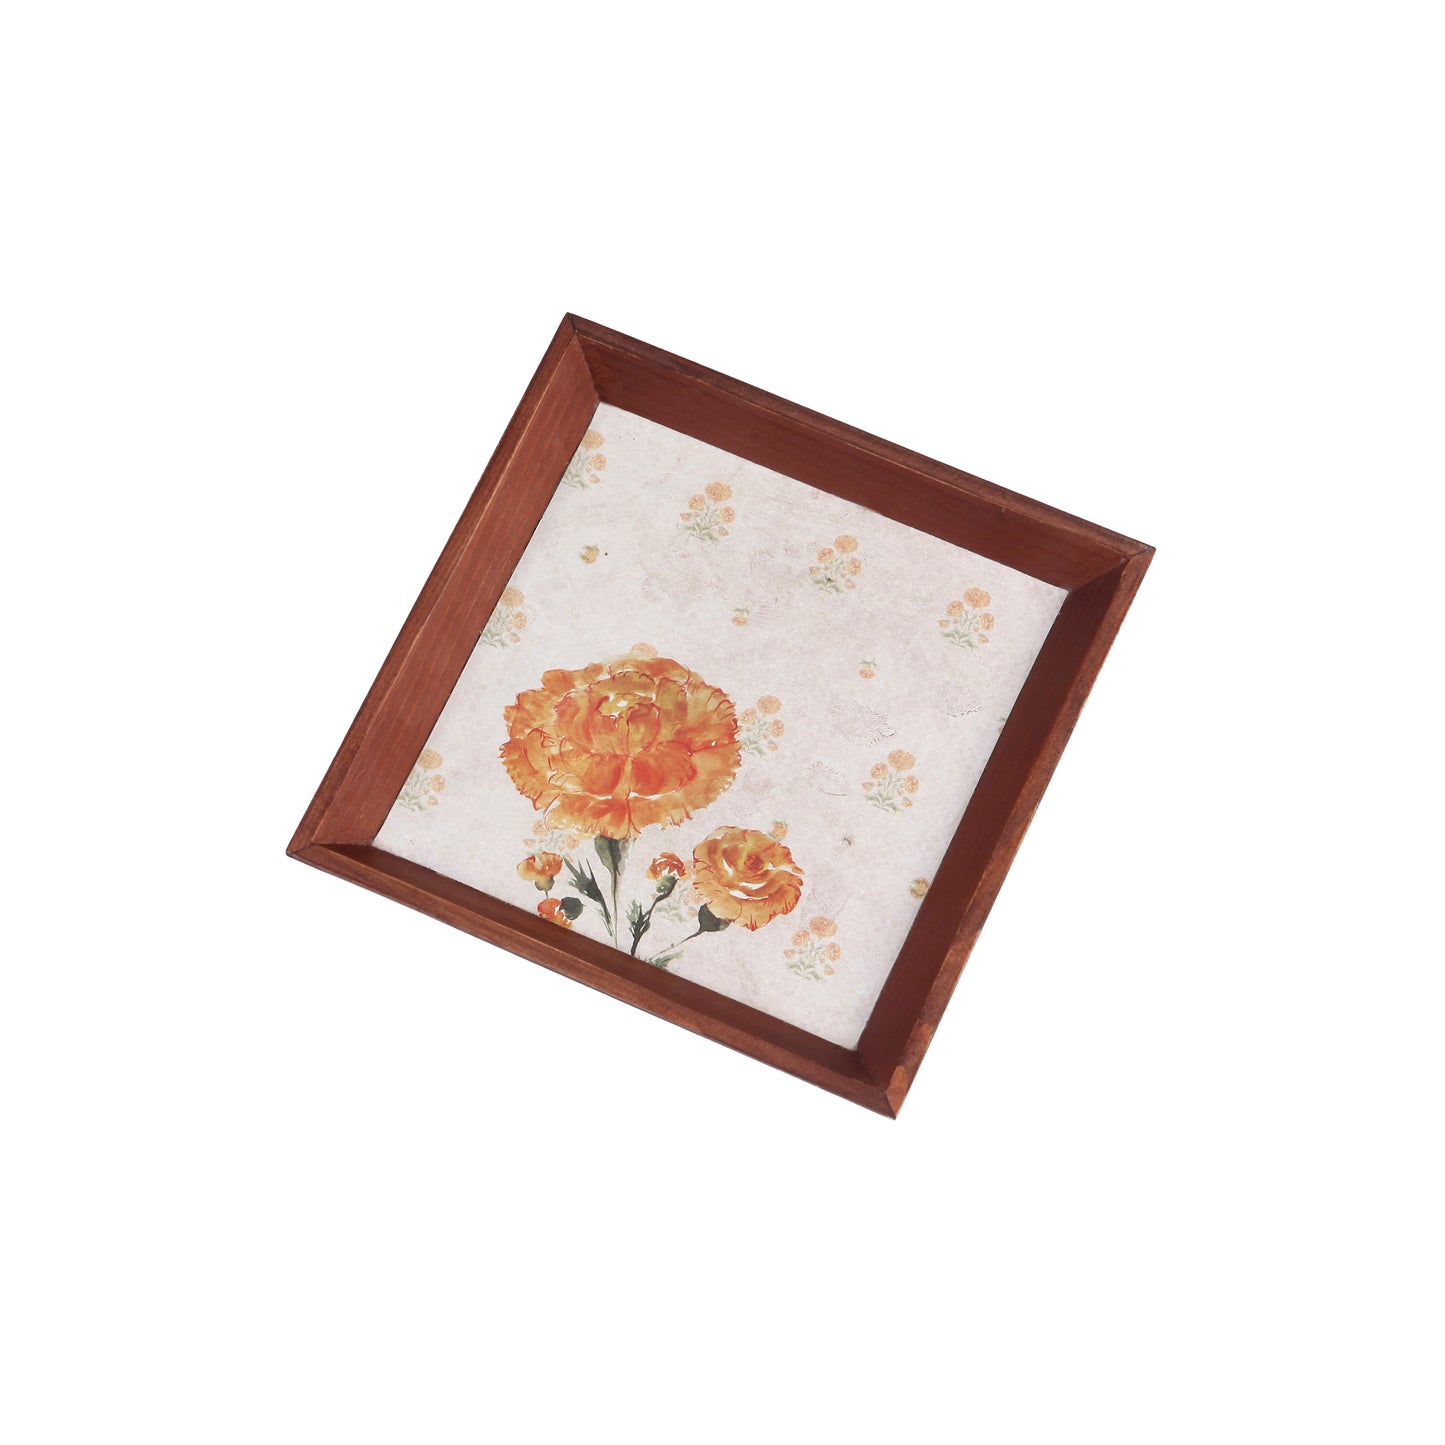 A Tiny Mistake Marigold Small Square Wooden Serving Tray, 18 x 18 x 2 cm